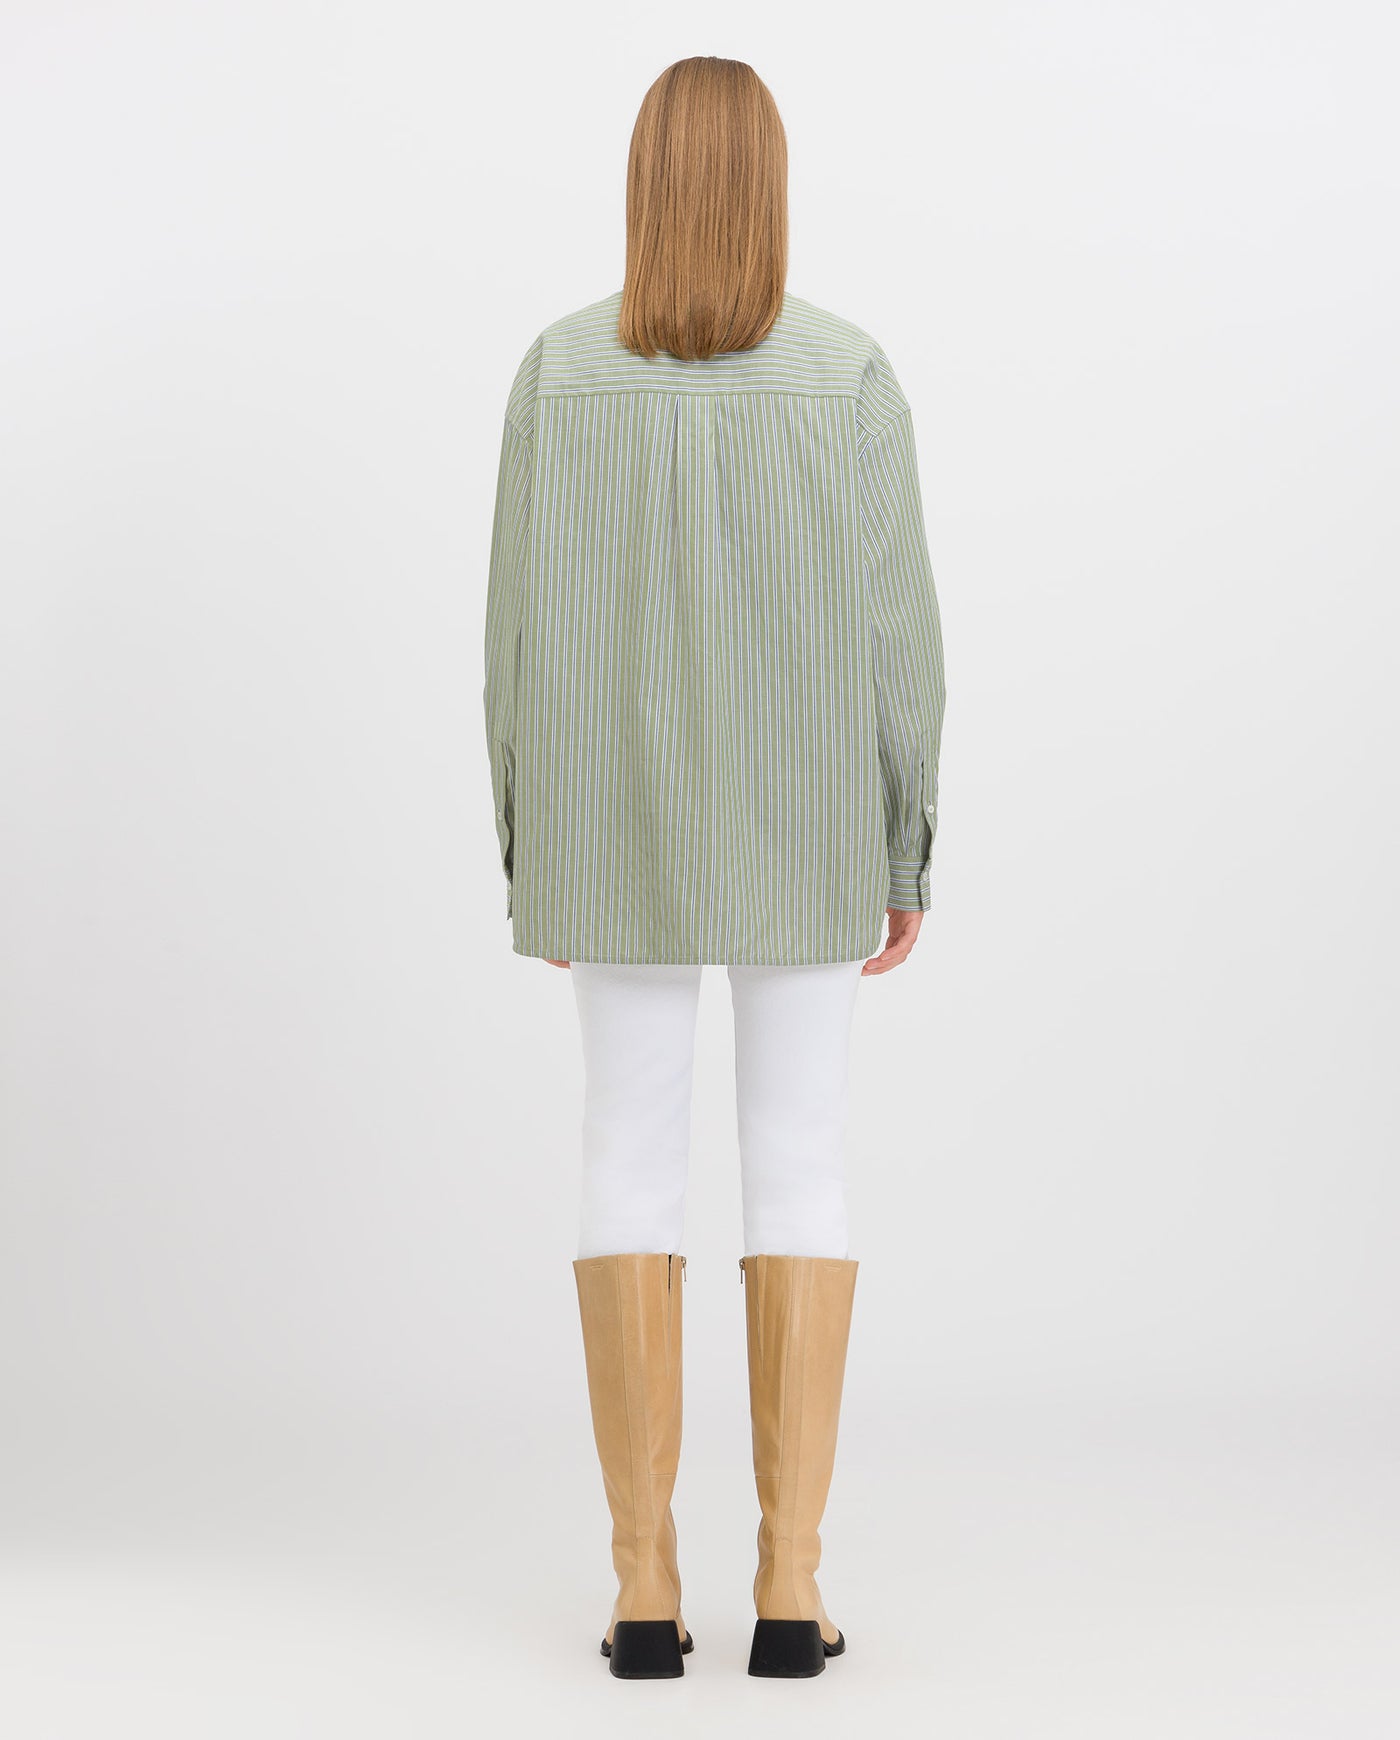 BETHANY LILLY Blouse